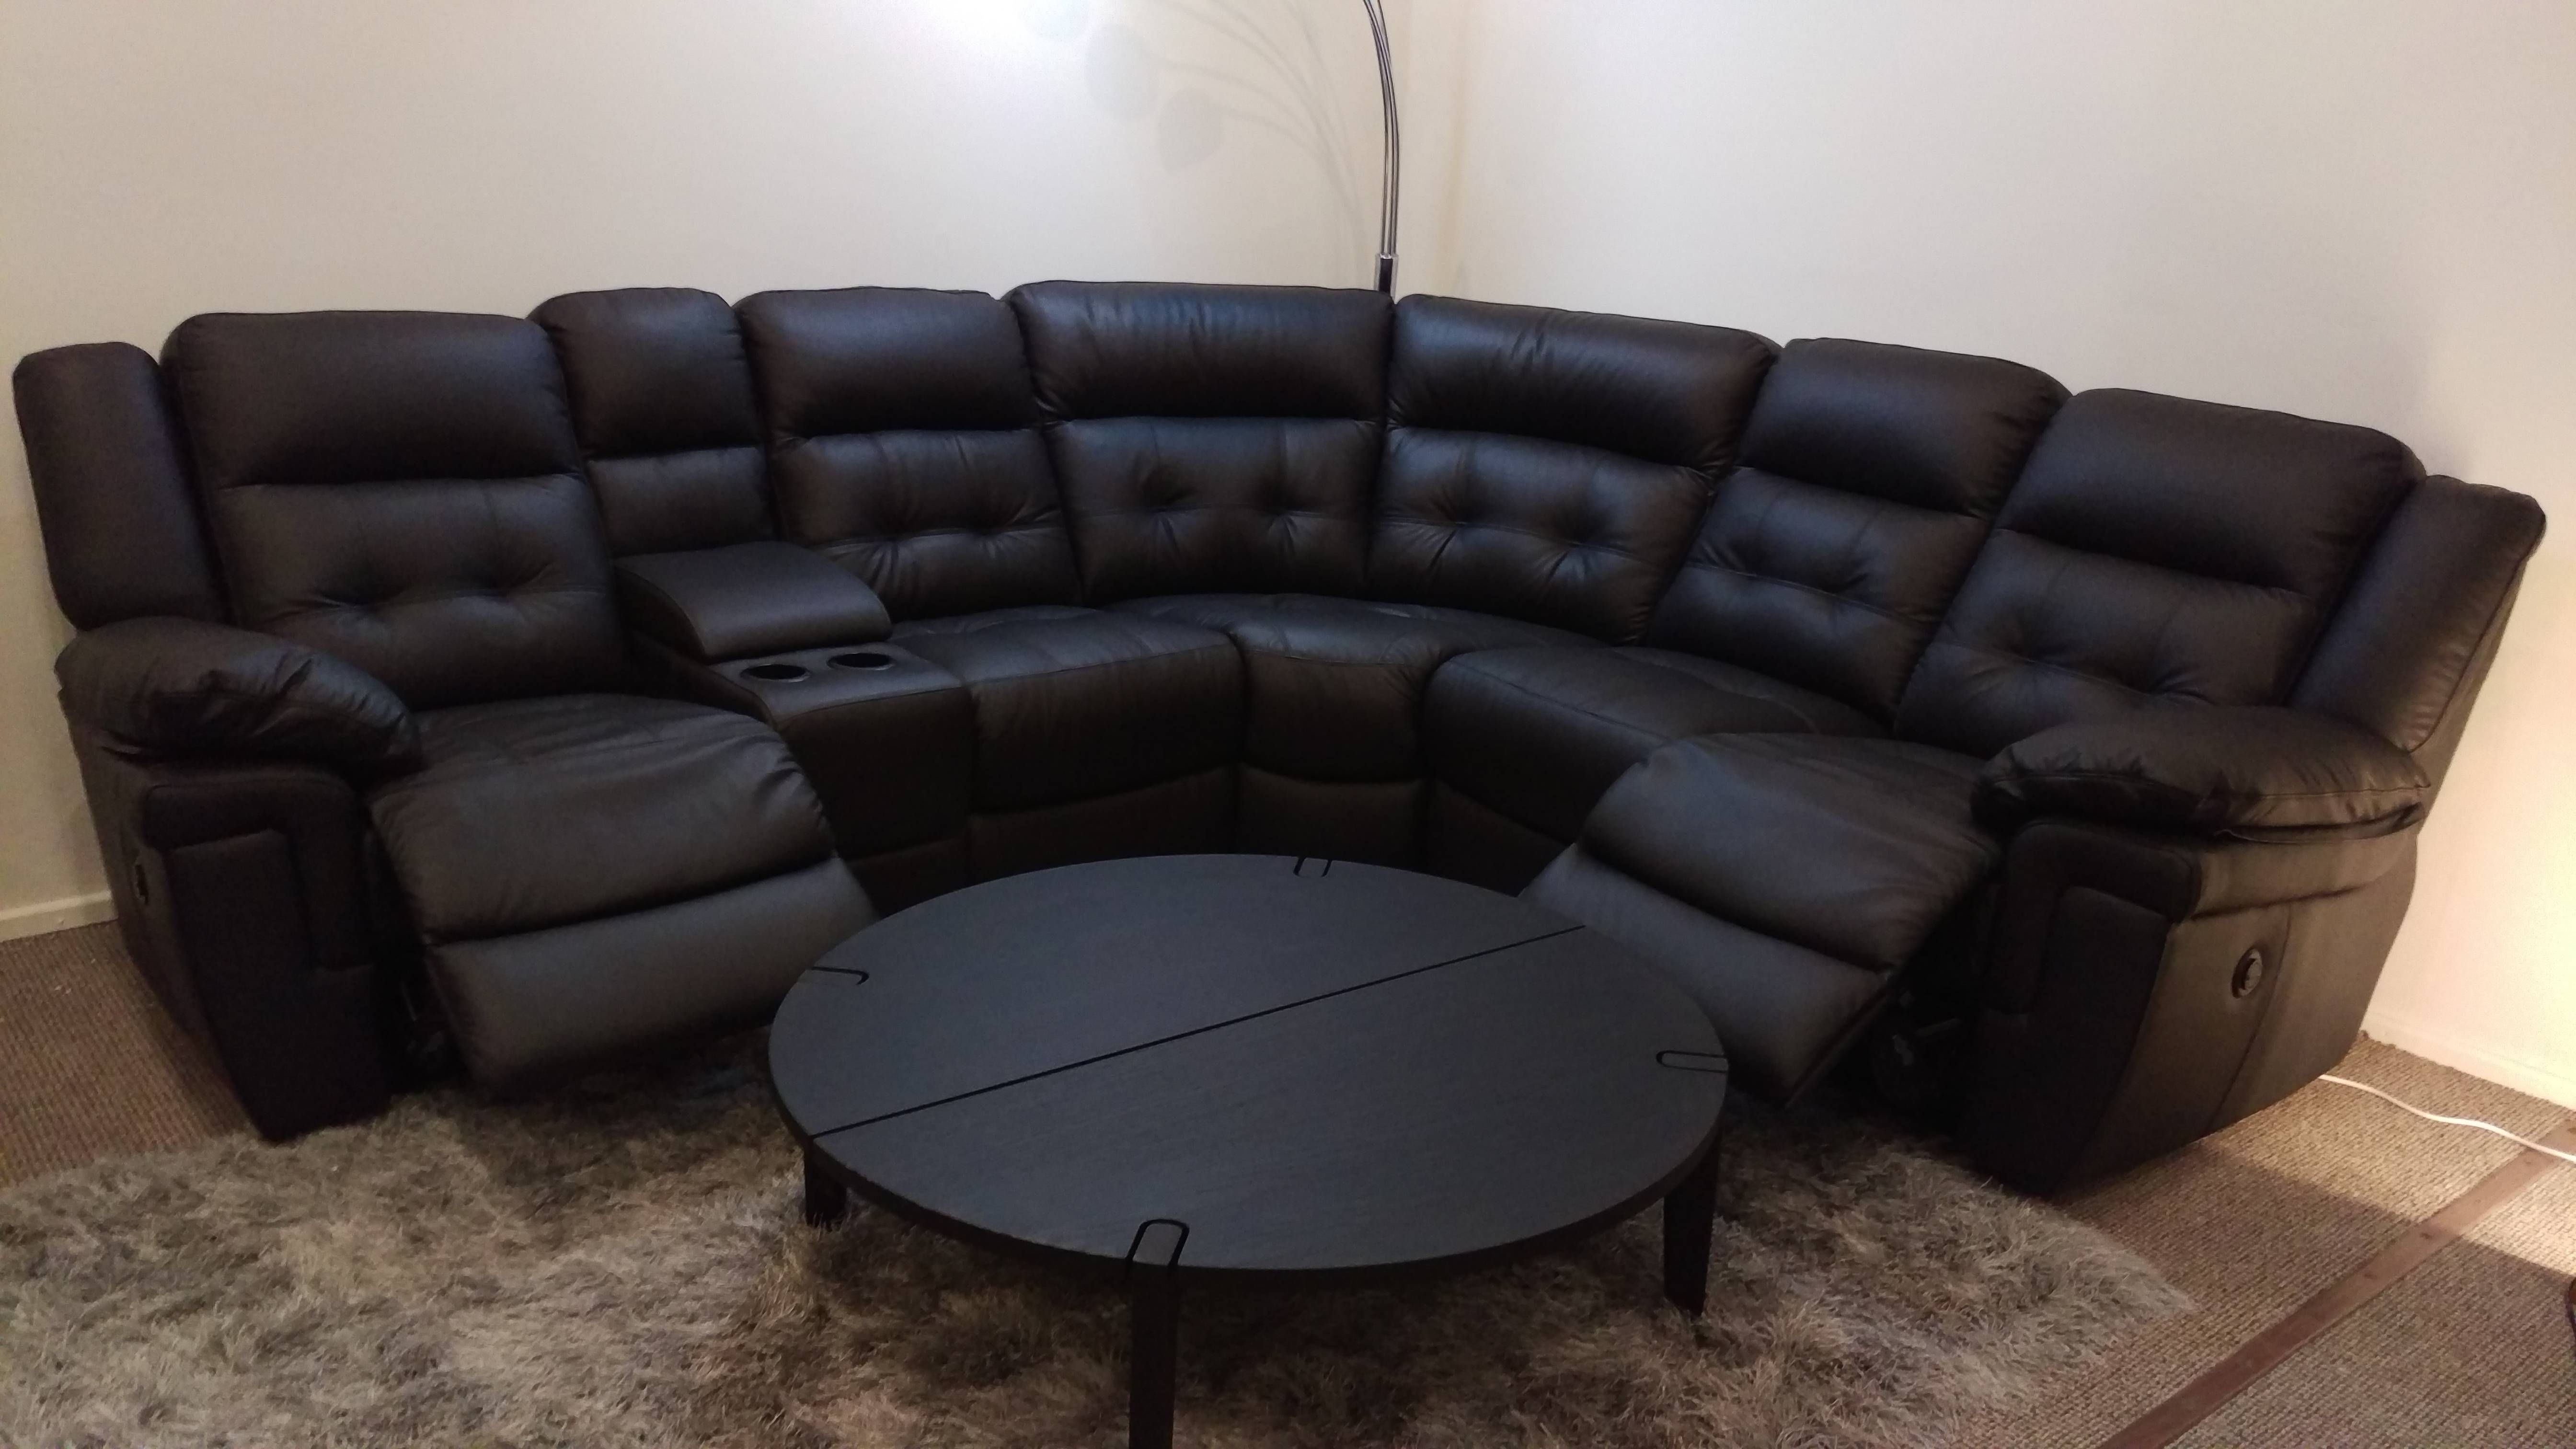 Leather Corner Sofa Recliner | Tehranmix Decoration Intended For Large Black Leather Corner Sofas (View 12 of 30)